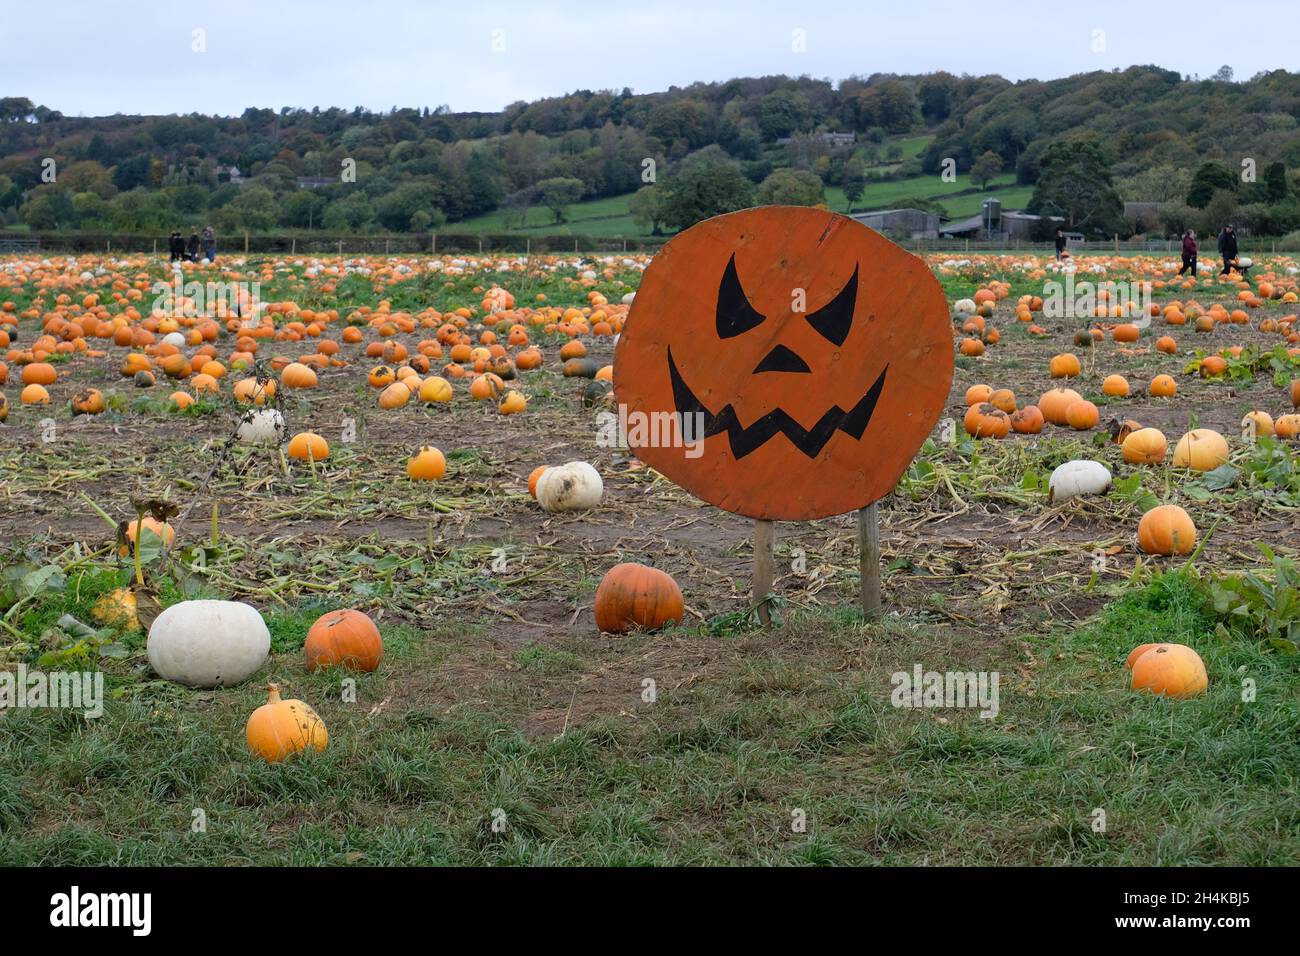 Pumpkin sign in a field of pumpkins waiting to be picked for Halloween at Ashover Pumpkins a pick your own pumpkin farm at Ashover, Derbyshire, UK Stock Photo